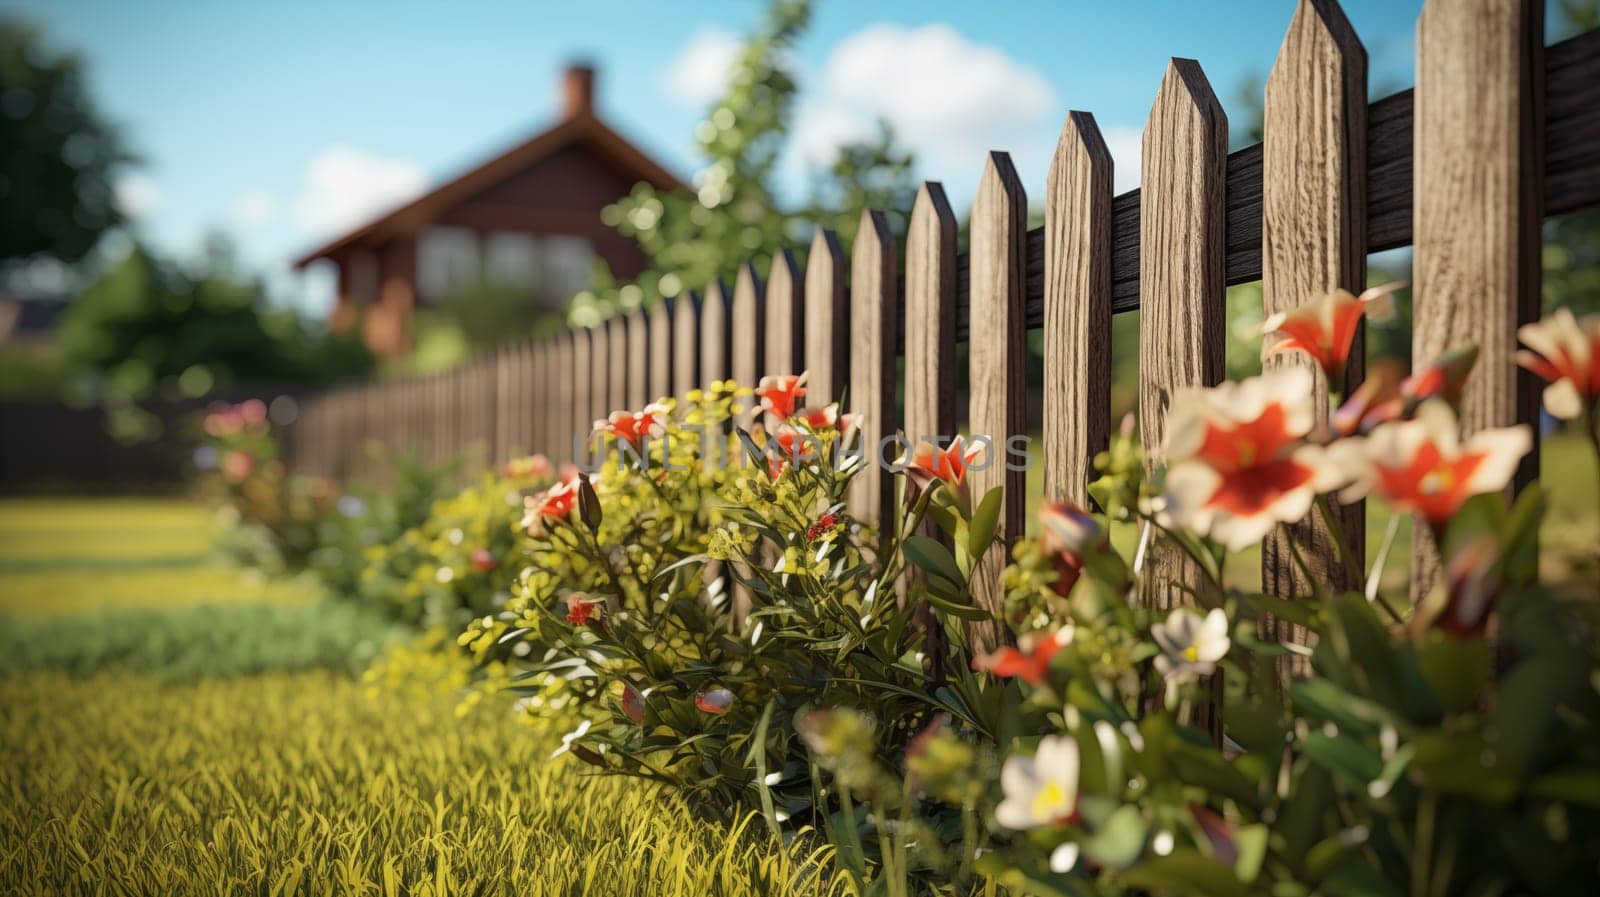 flowers blooming along a wooden picket fence in a suburban setting with a house in the background by Zakharova